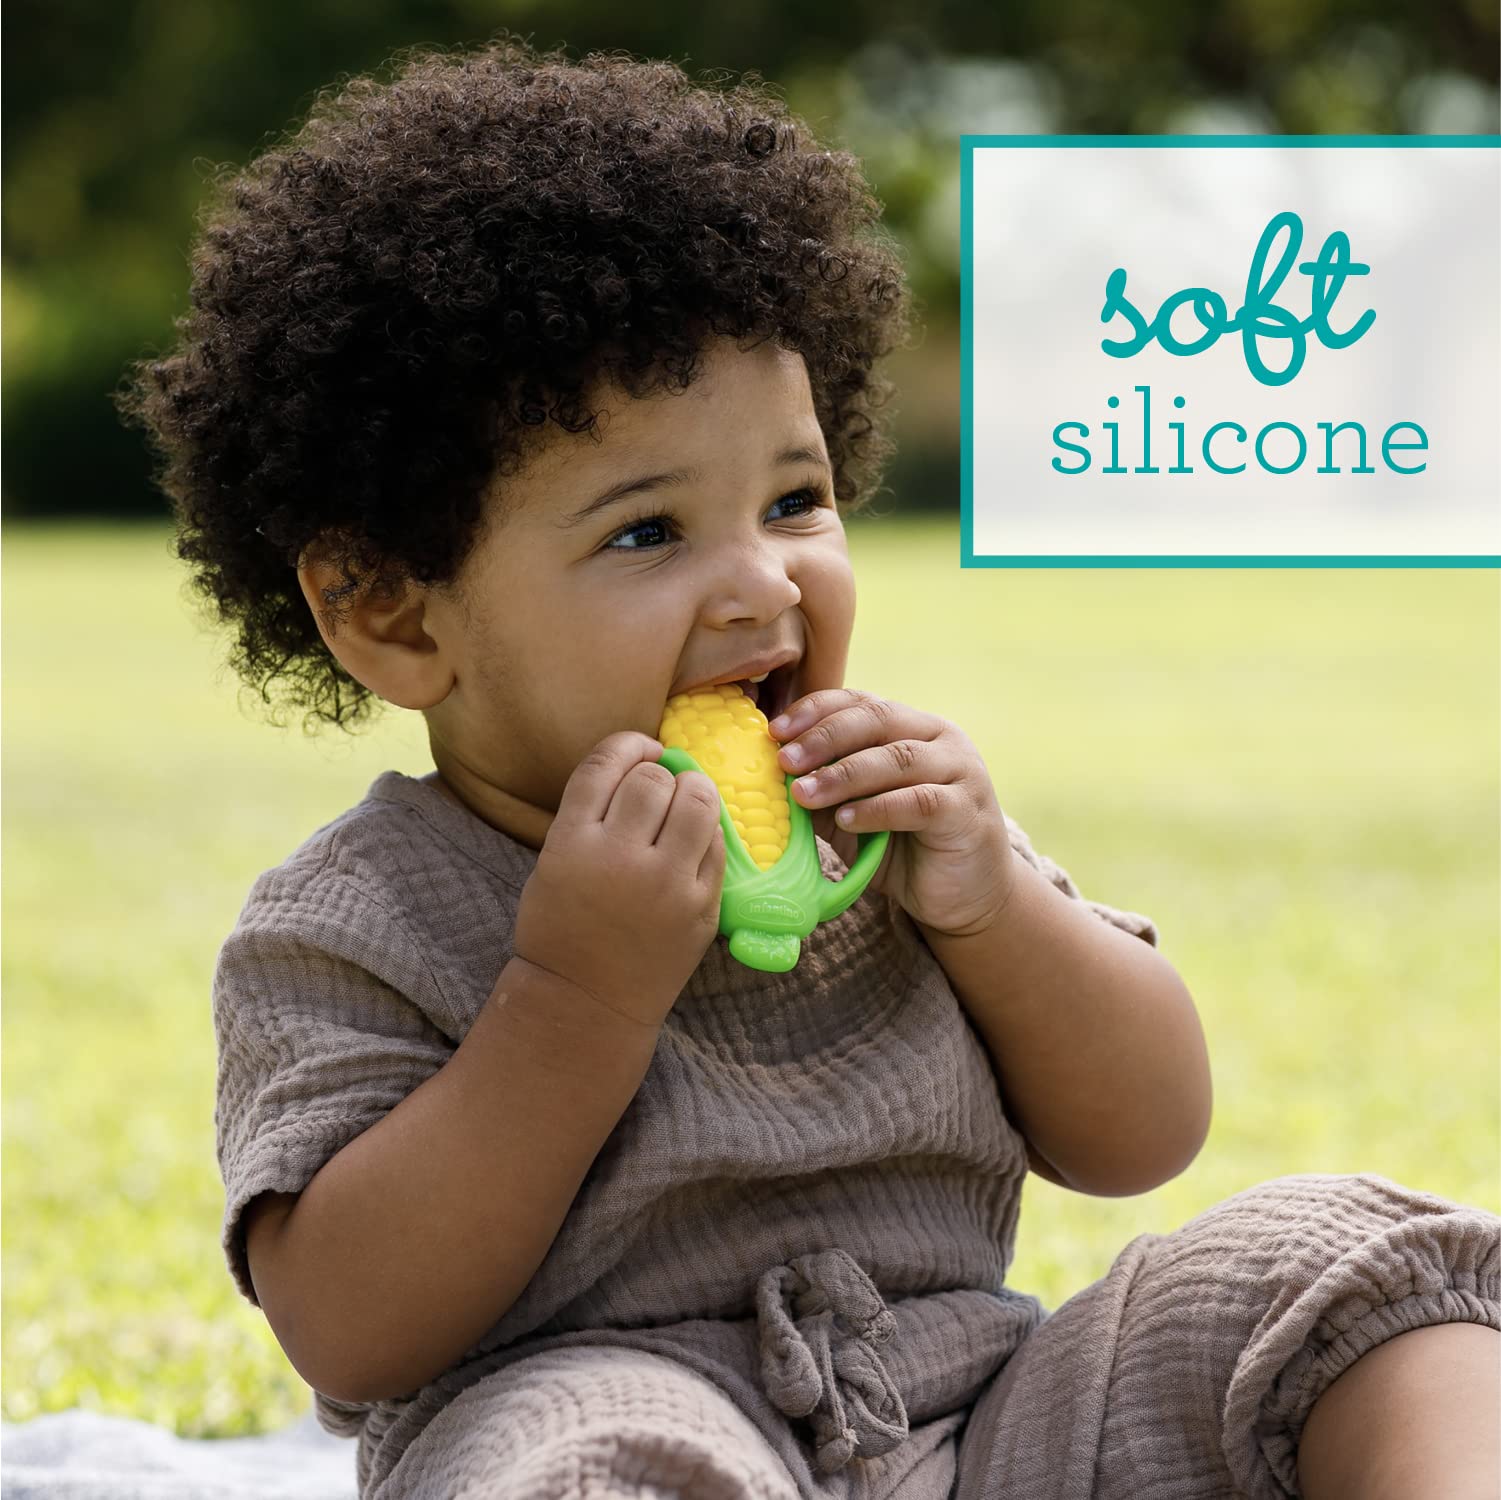 Infantino Lil' Nibbles Textured Silicone Teether - Sensory Exploration and Teething Relief with Easy to Hold Handles, Corn